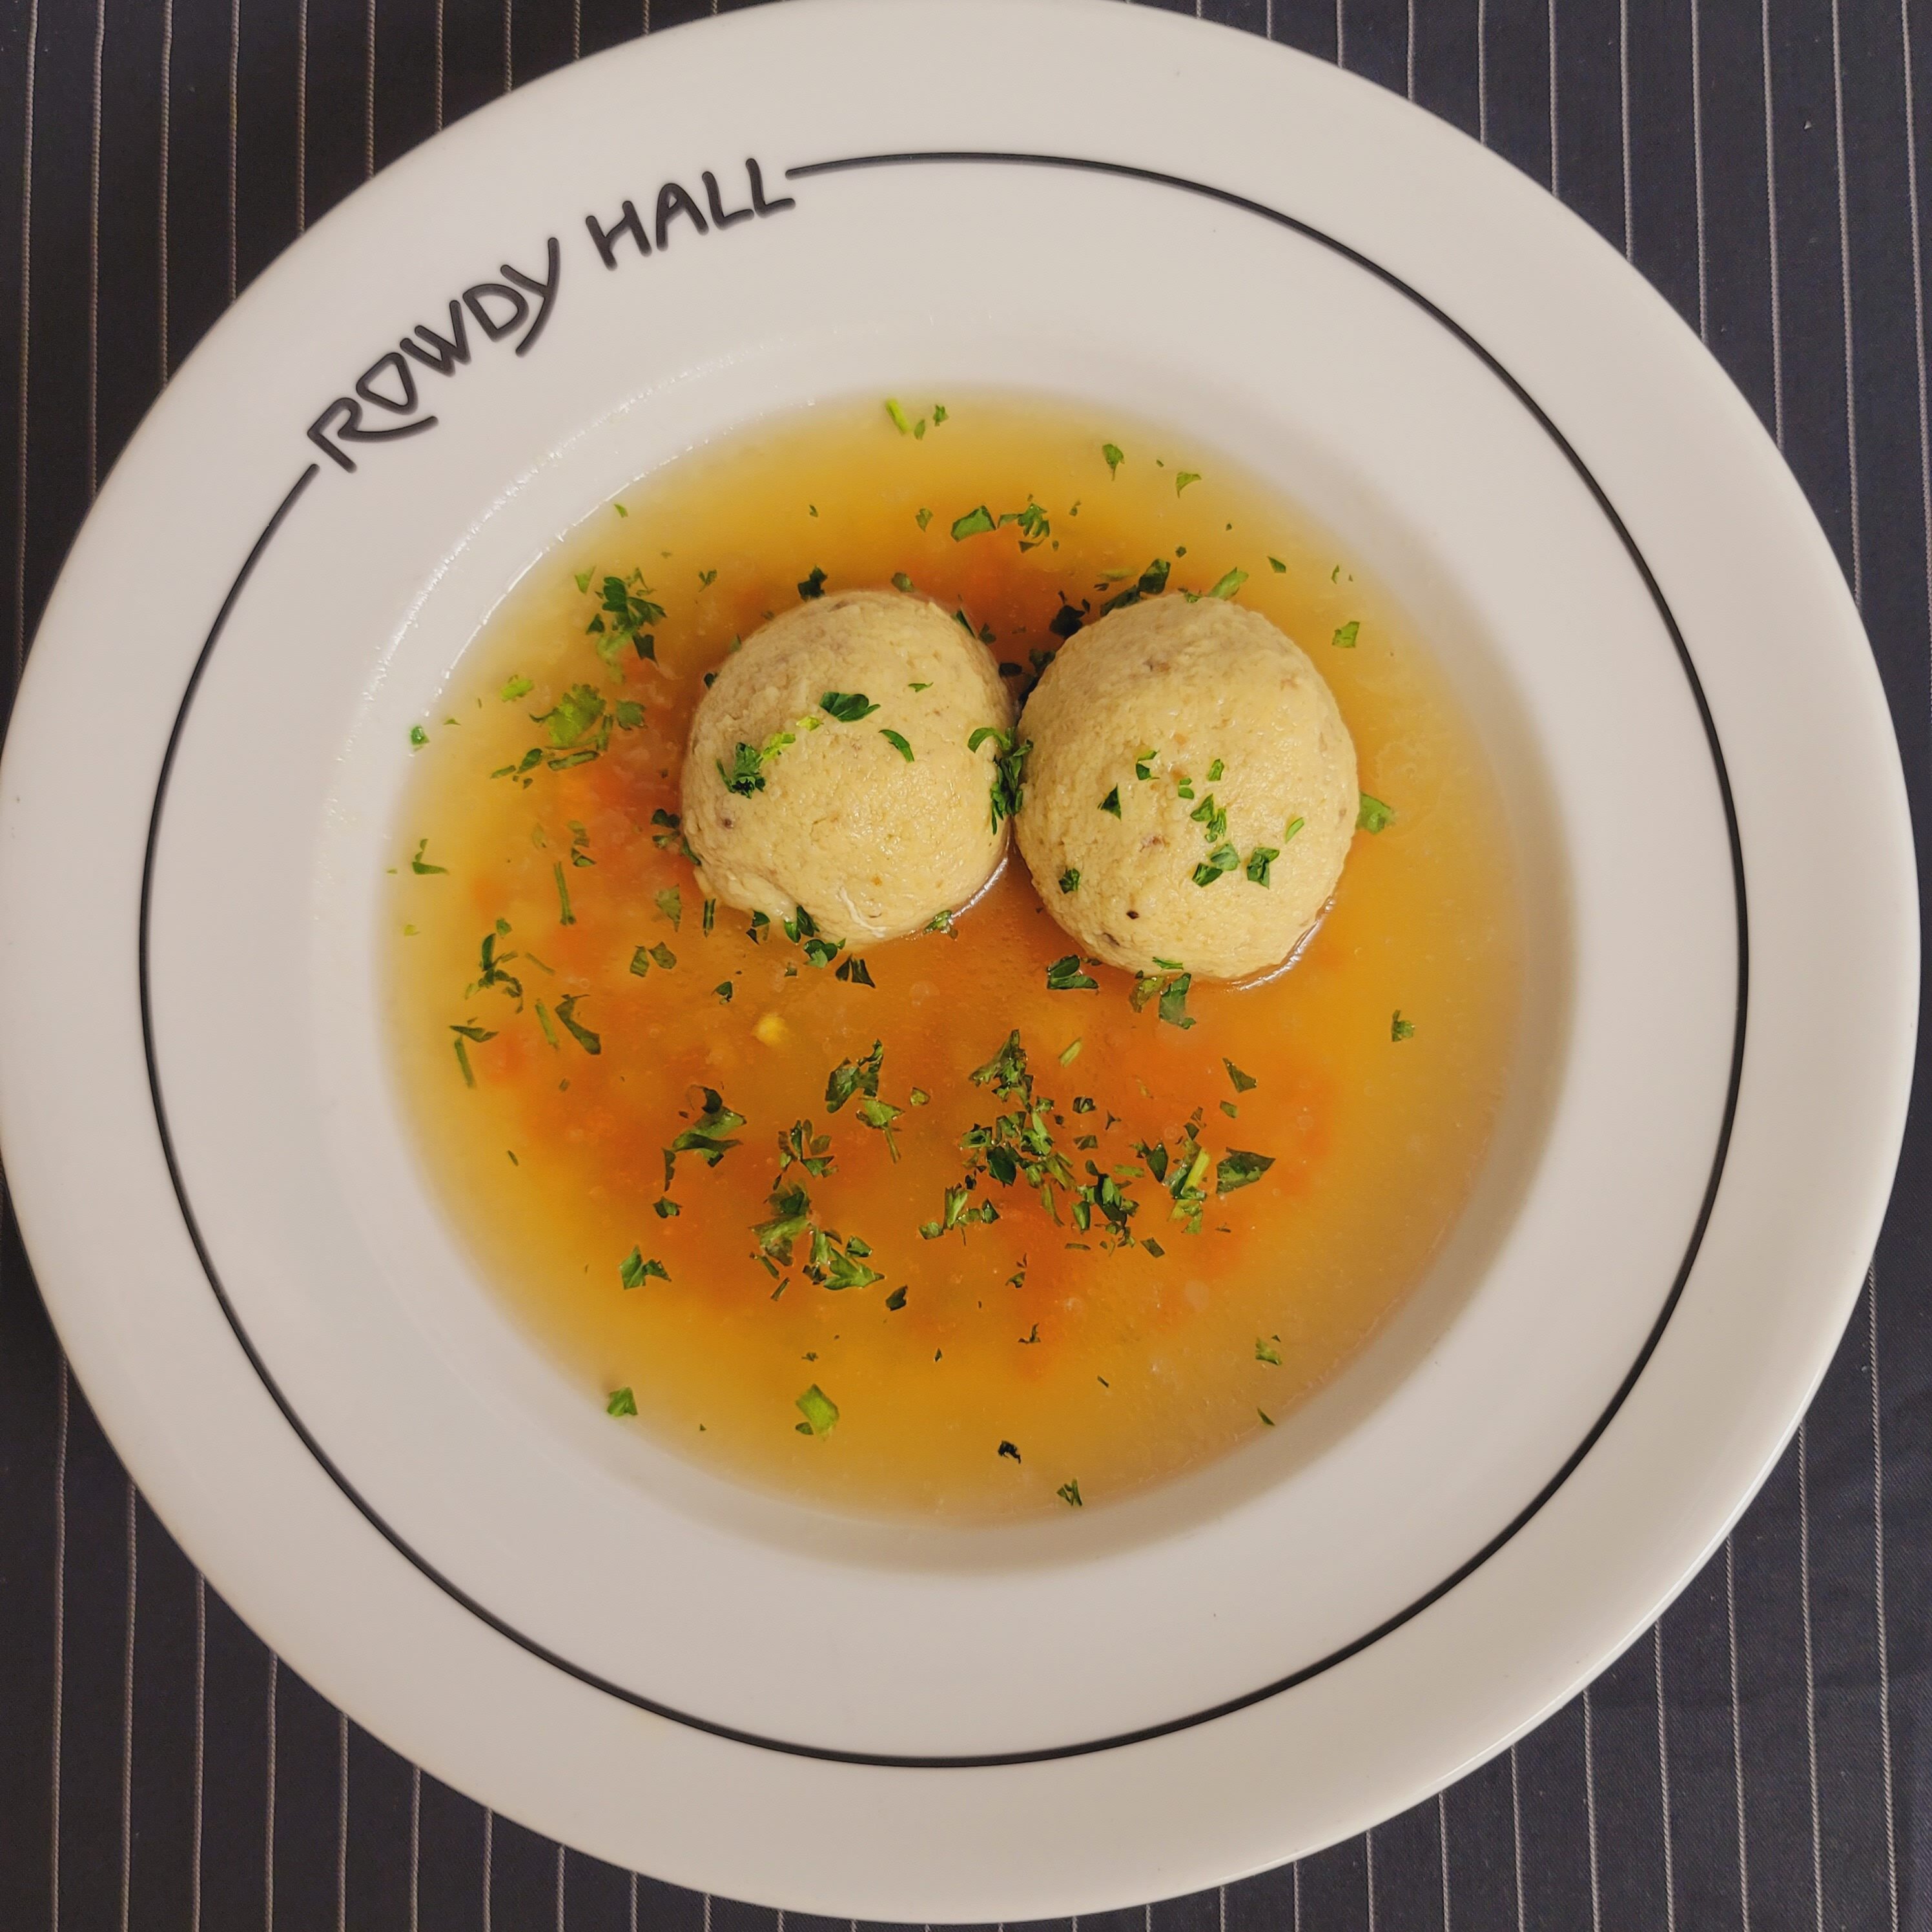 Rowdy Hall's Passover offerings include Ed’s Matzo Ball Soup. COURTESY ROWDY HALL